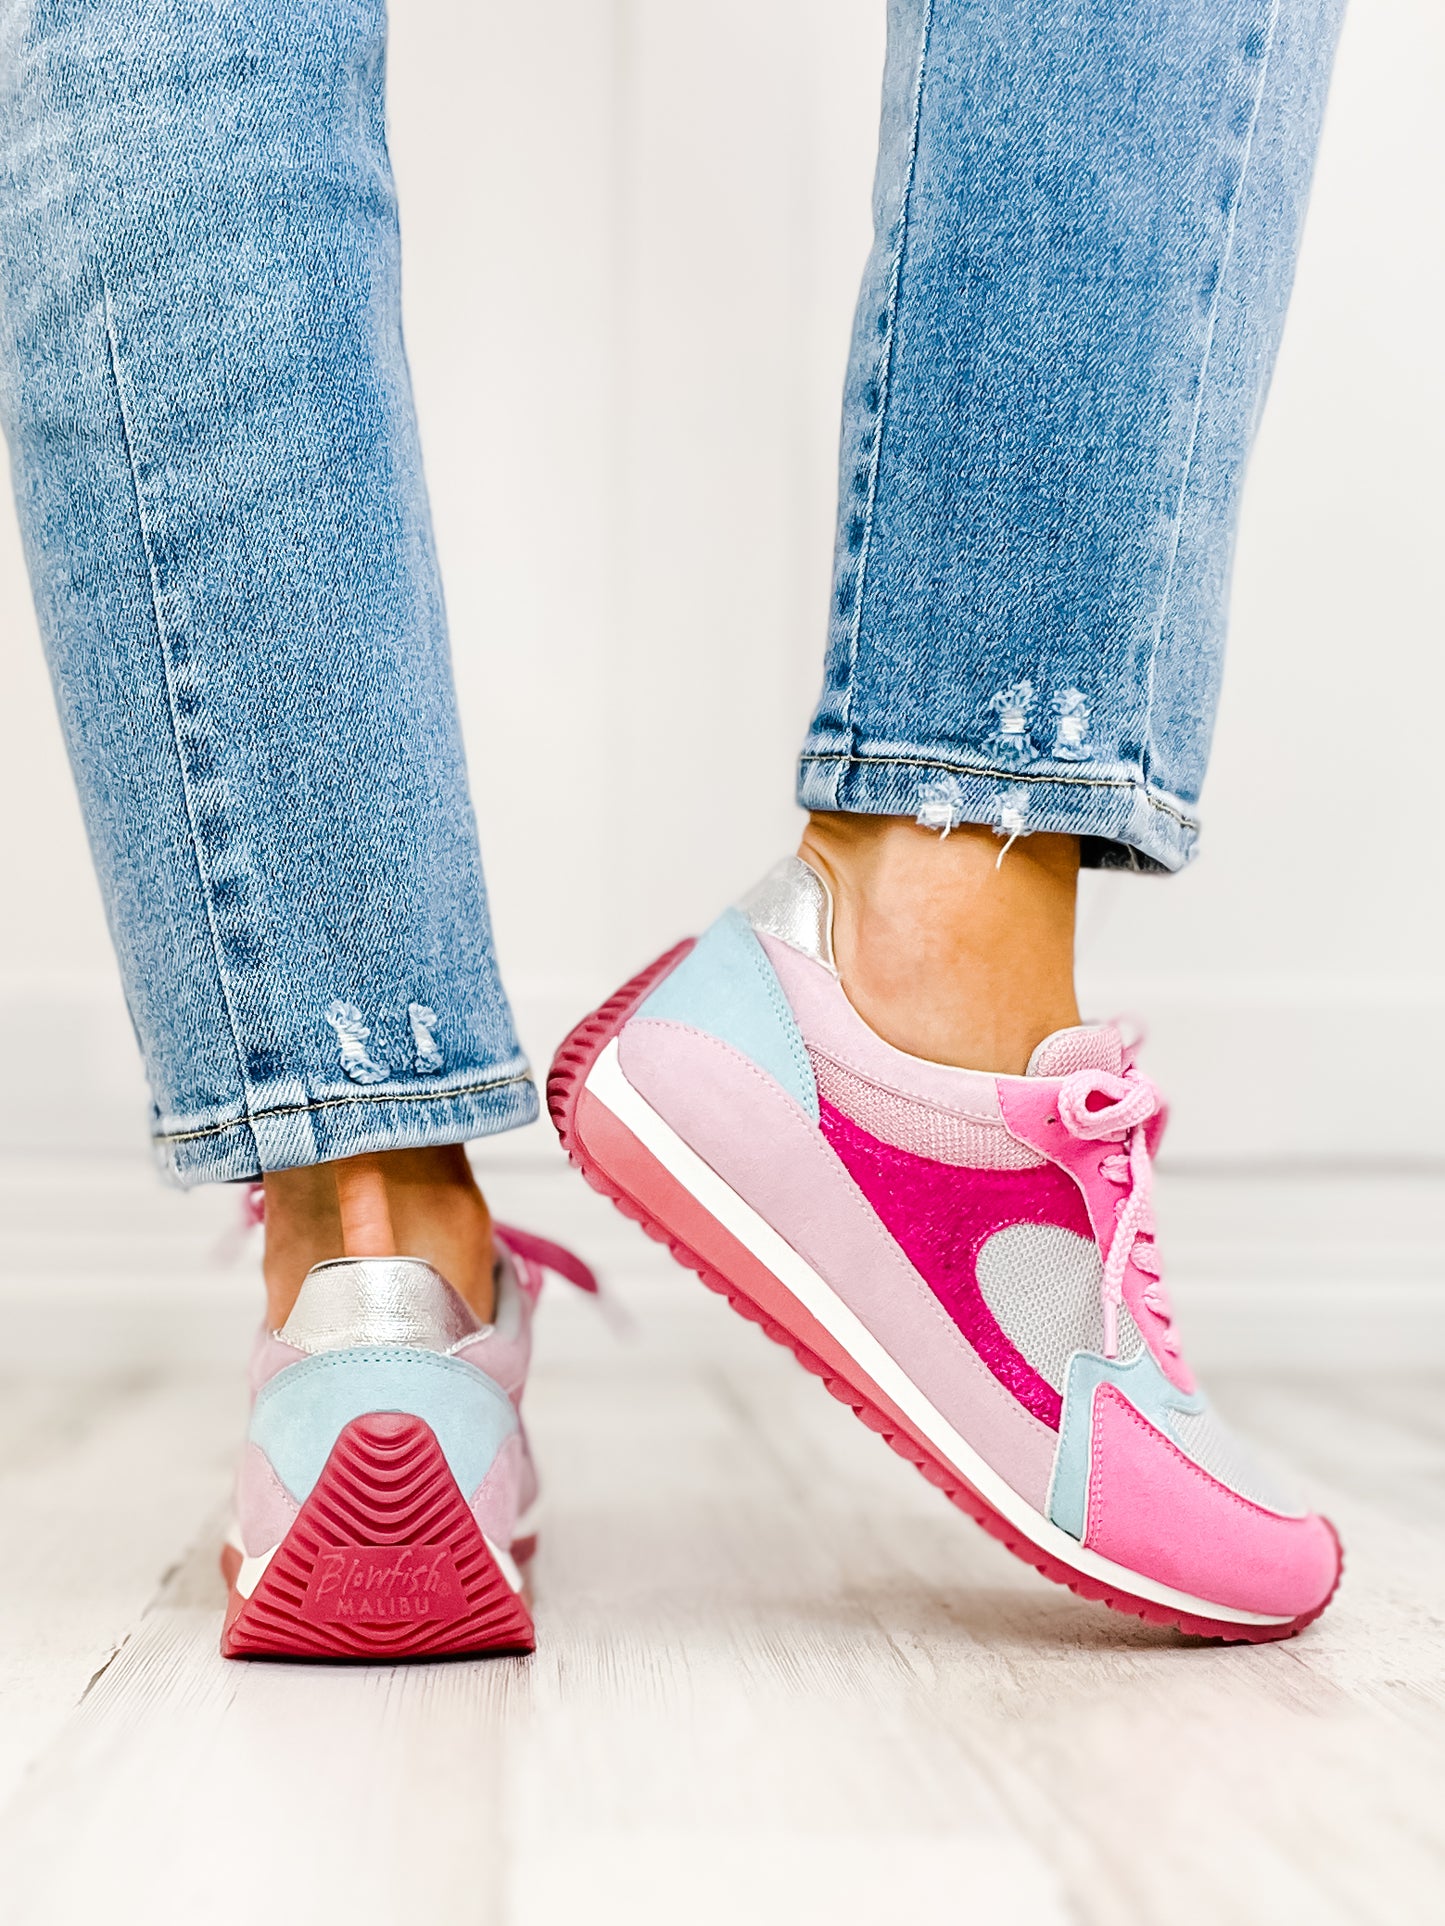 Blowfish Brentwood Tennis Shoes in Lipstick Pink